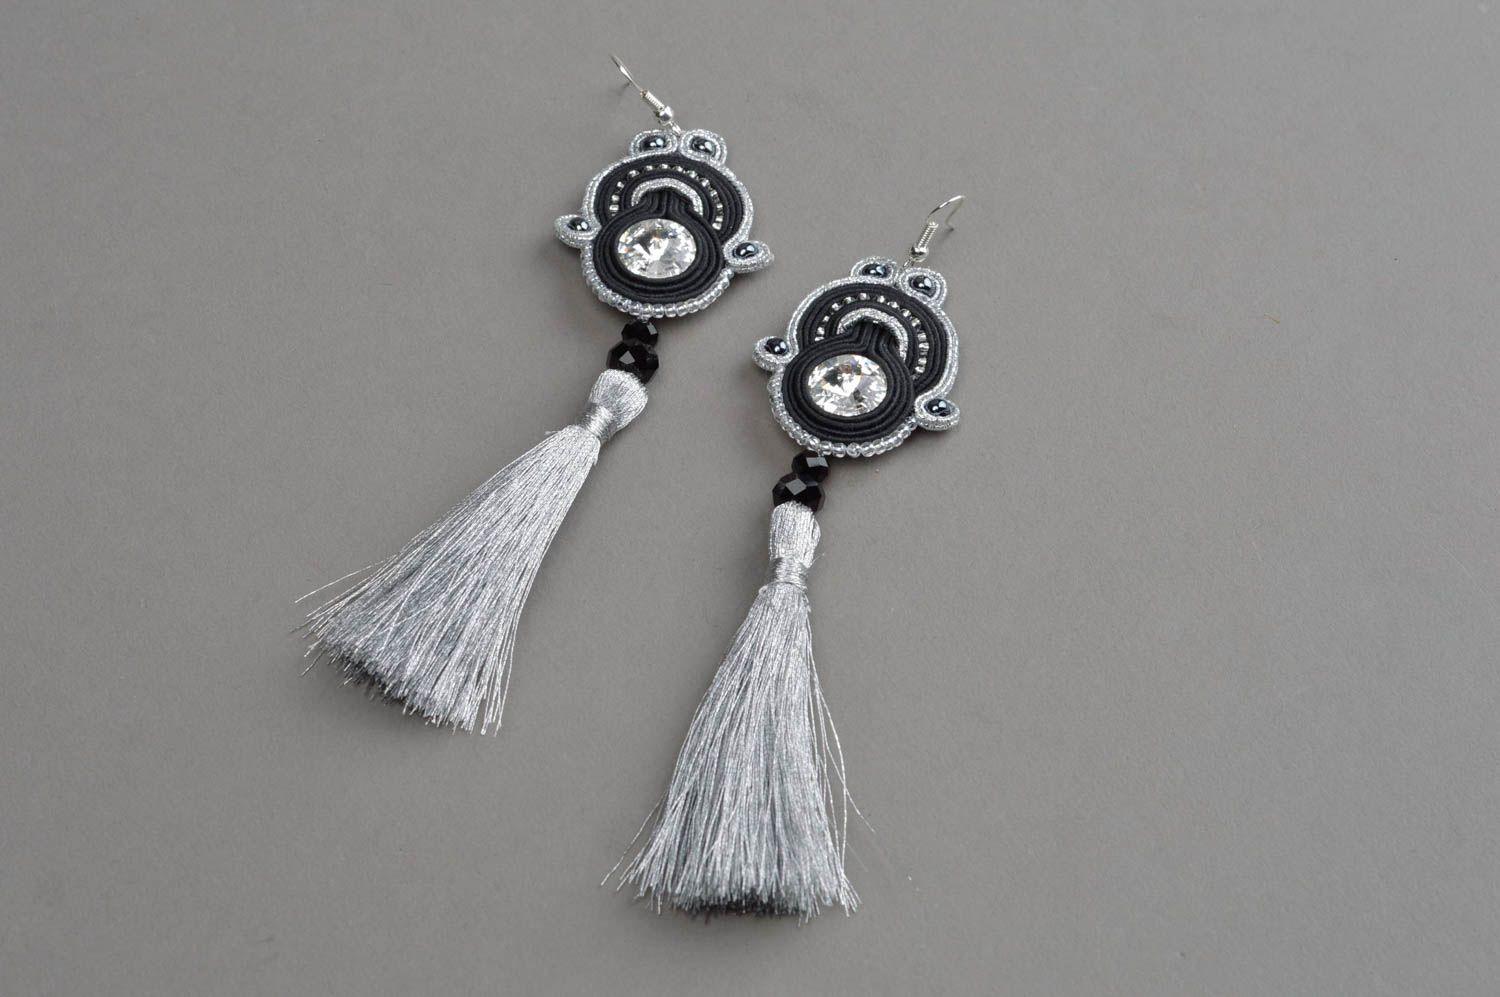 Handmade black and white soutache earrings with tassels designer accessory photo 2